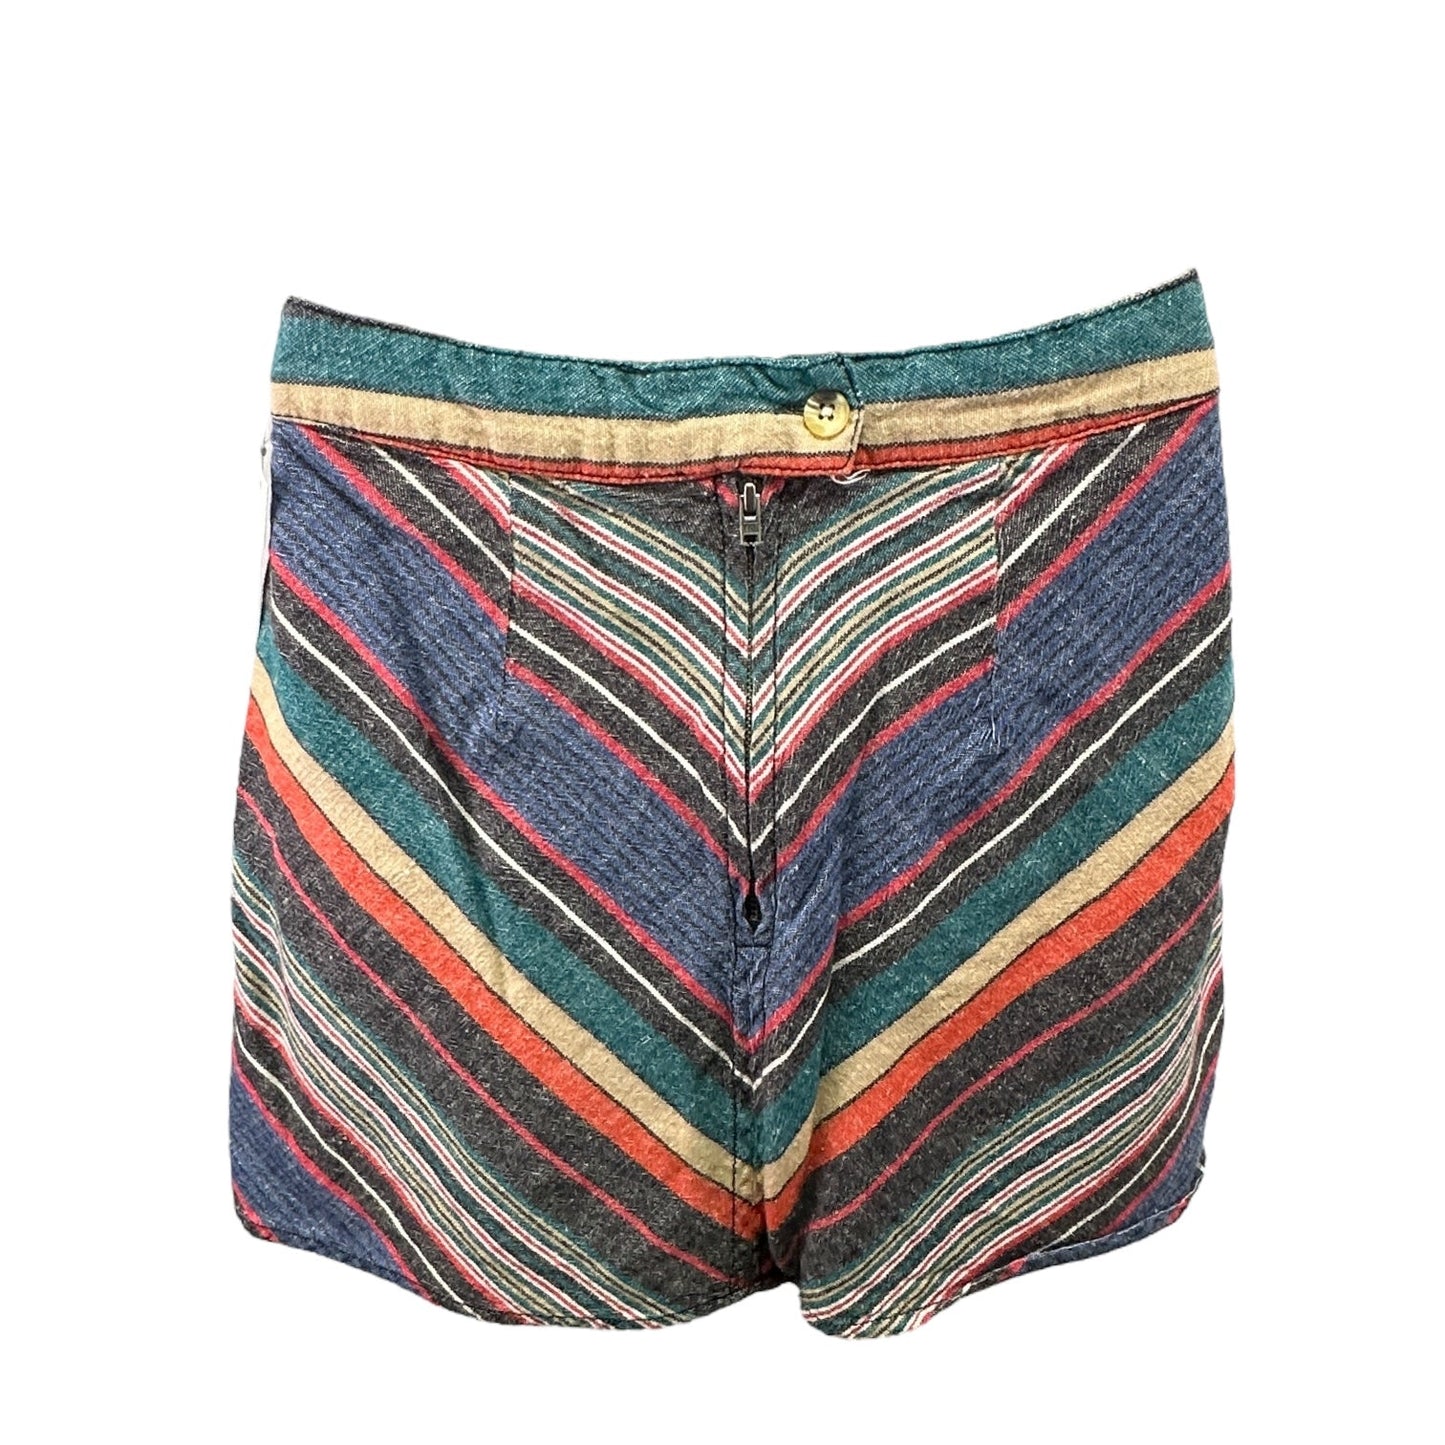 Yours Truly Mini Skirt Free People, Size 0